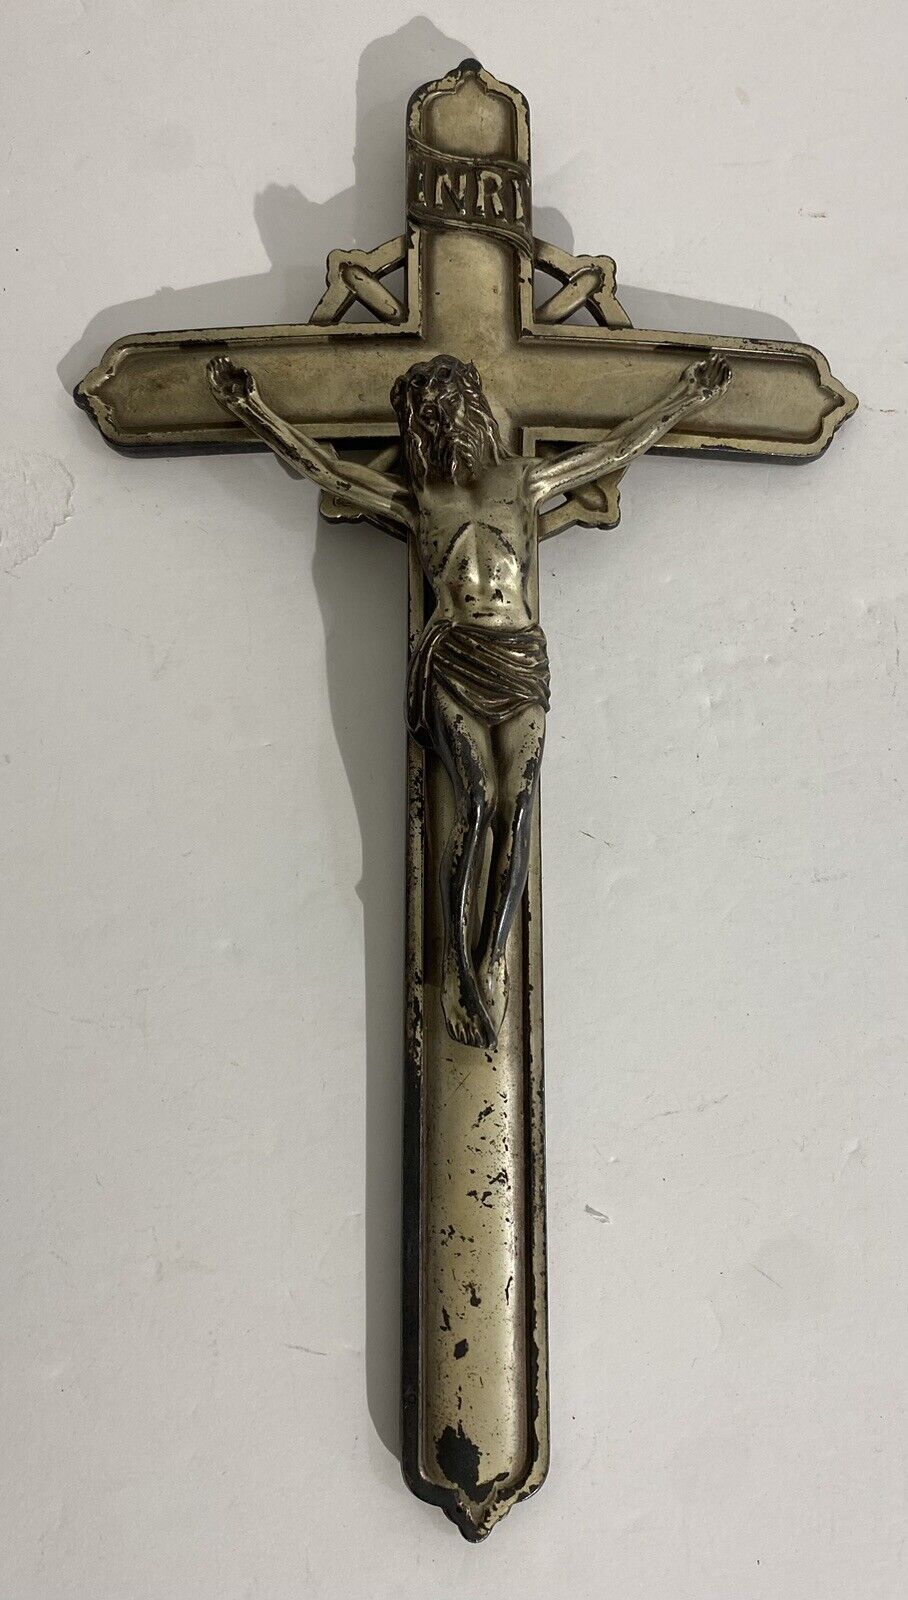 Vintage Antique Wall INRI Crucifix Cross Silver/Gold Color About 14” Tall